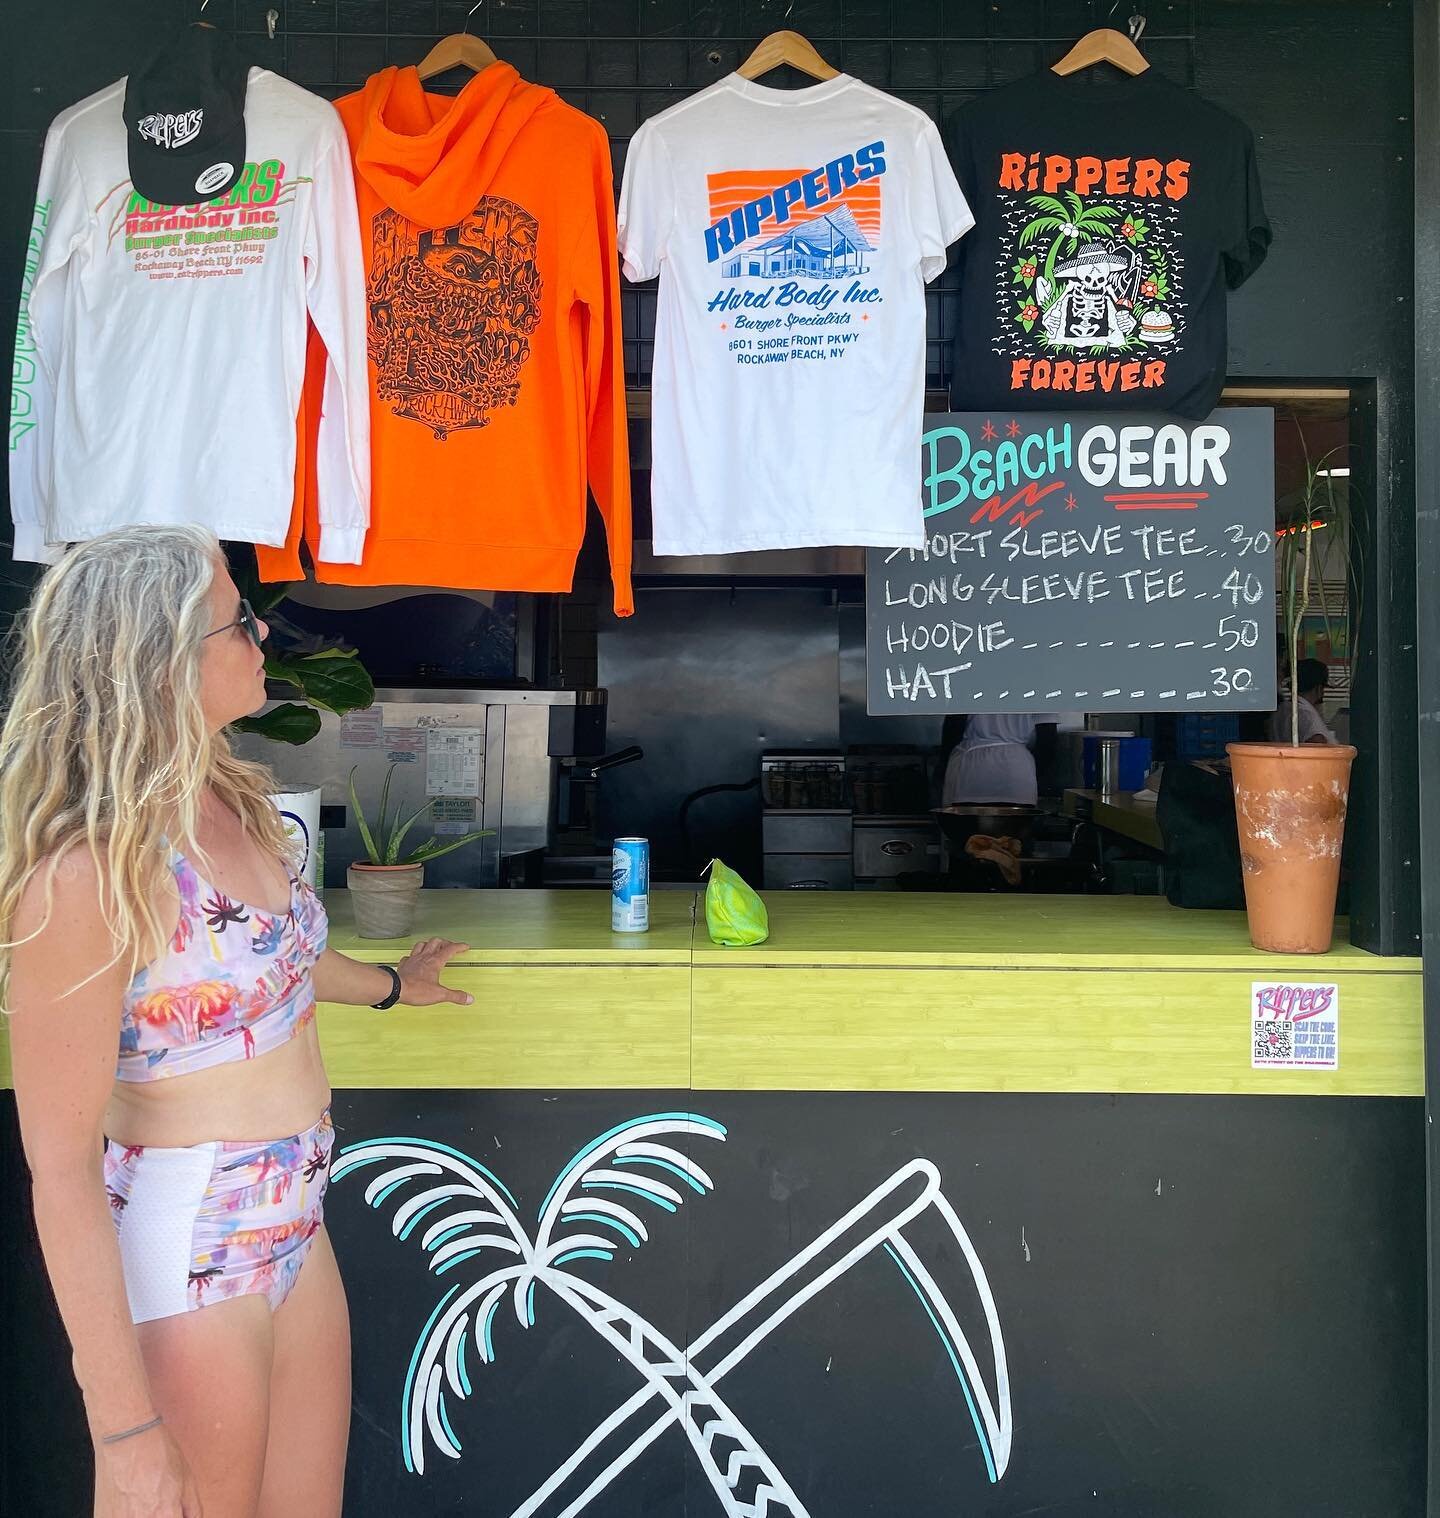 All apparel restocked on location and online! Which one are you wearing this summer?? 
.
.
.
.

#rippers #eatrippers #rippersrockawaybeach #rockawaybeach #surfnyc #surfrockaway #rippersmerch #rippersgear #rippersforever #hardbody #rippershardbody #be